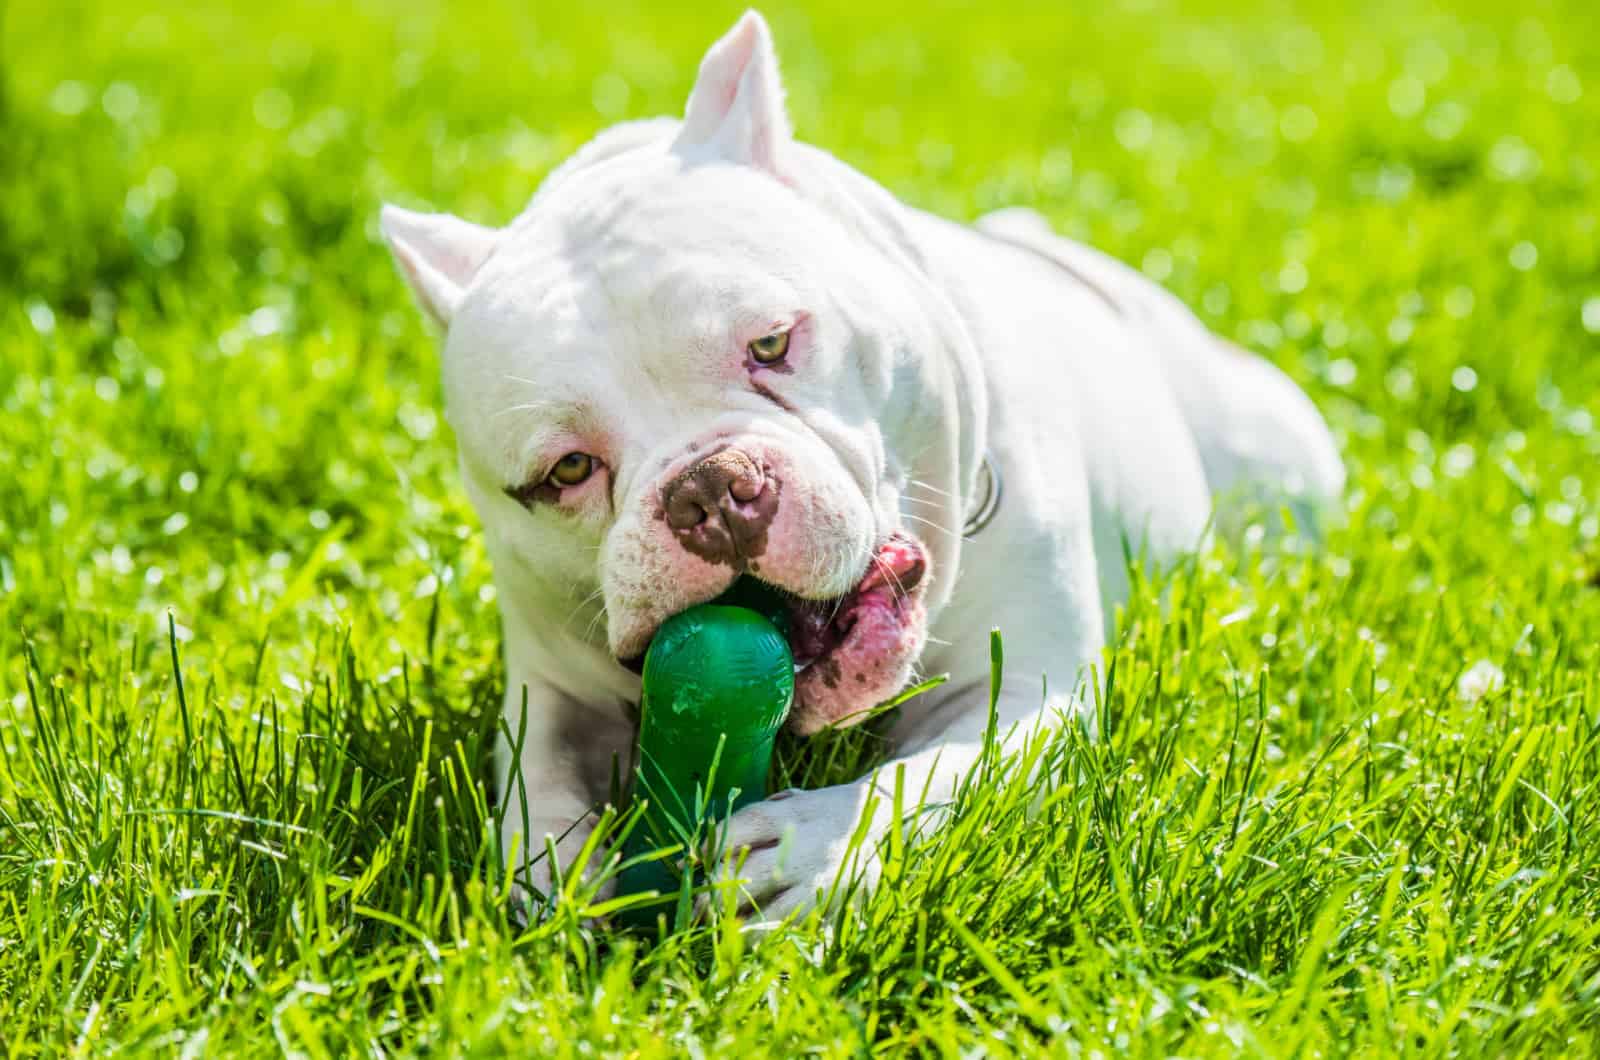 american bully chewing a toy